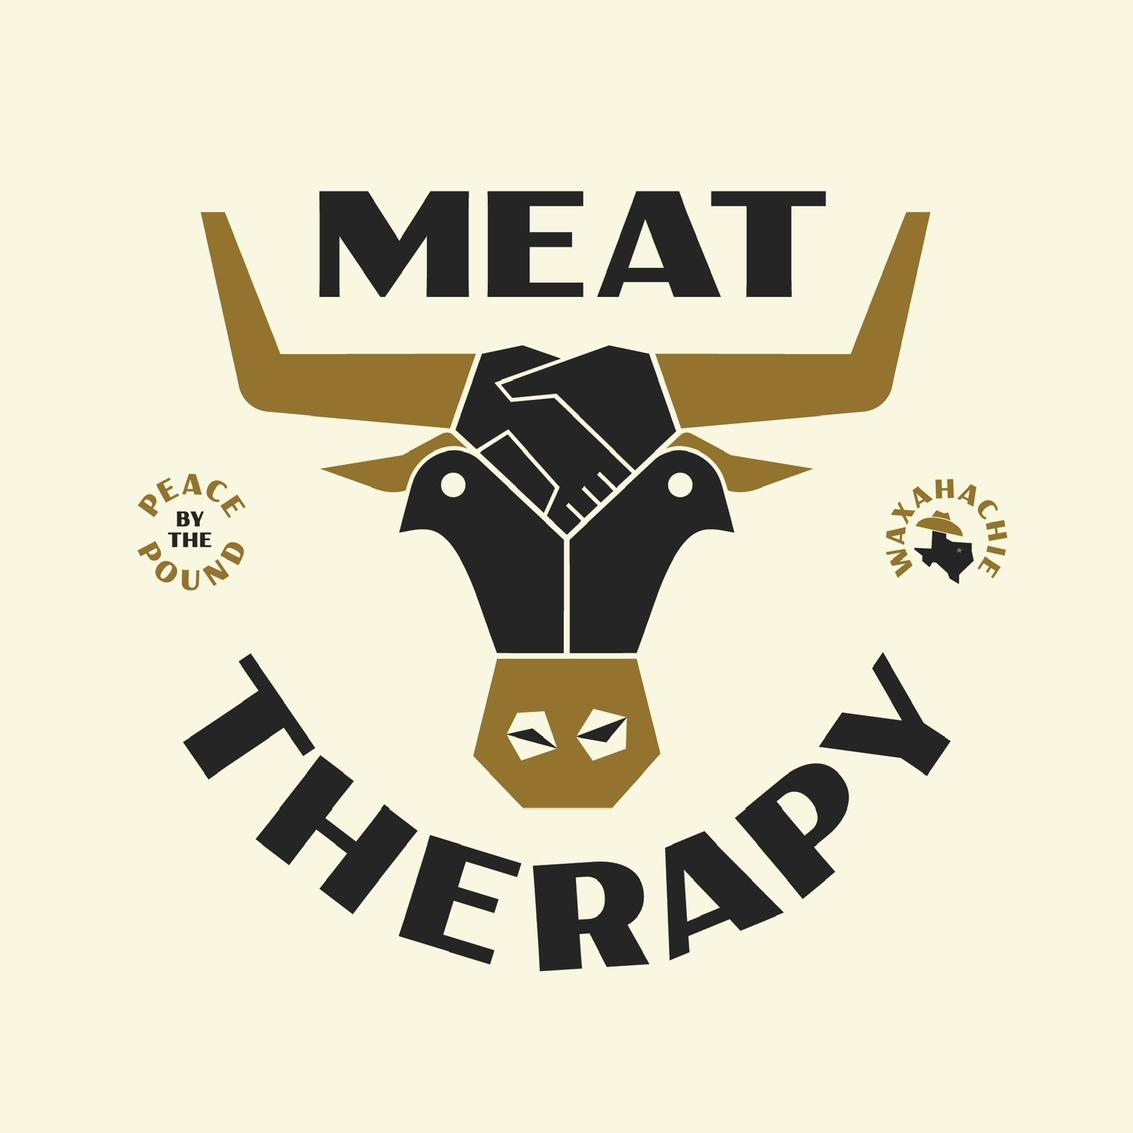 Meat Therapy's images